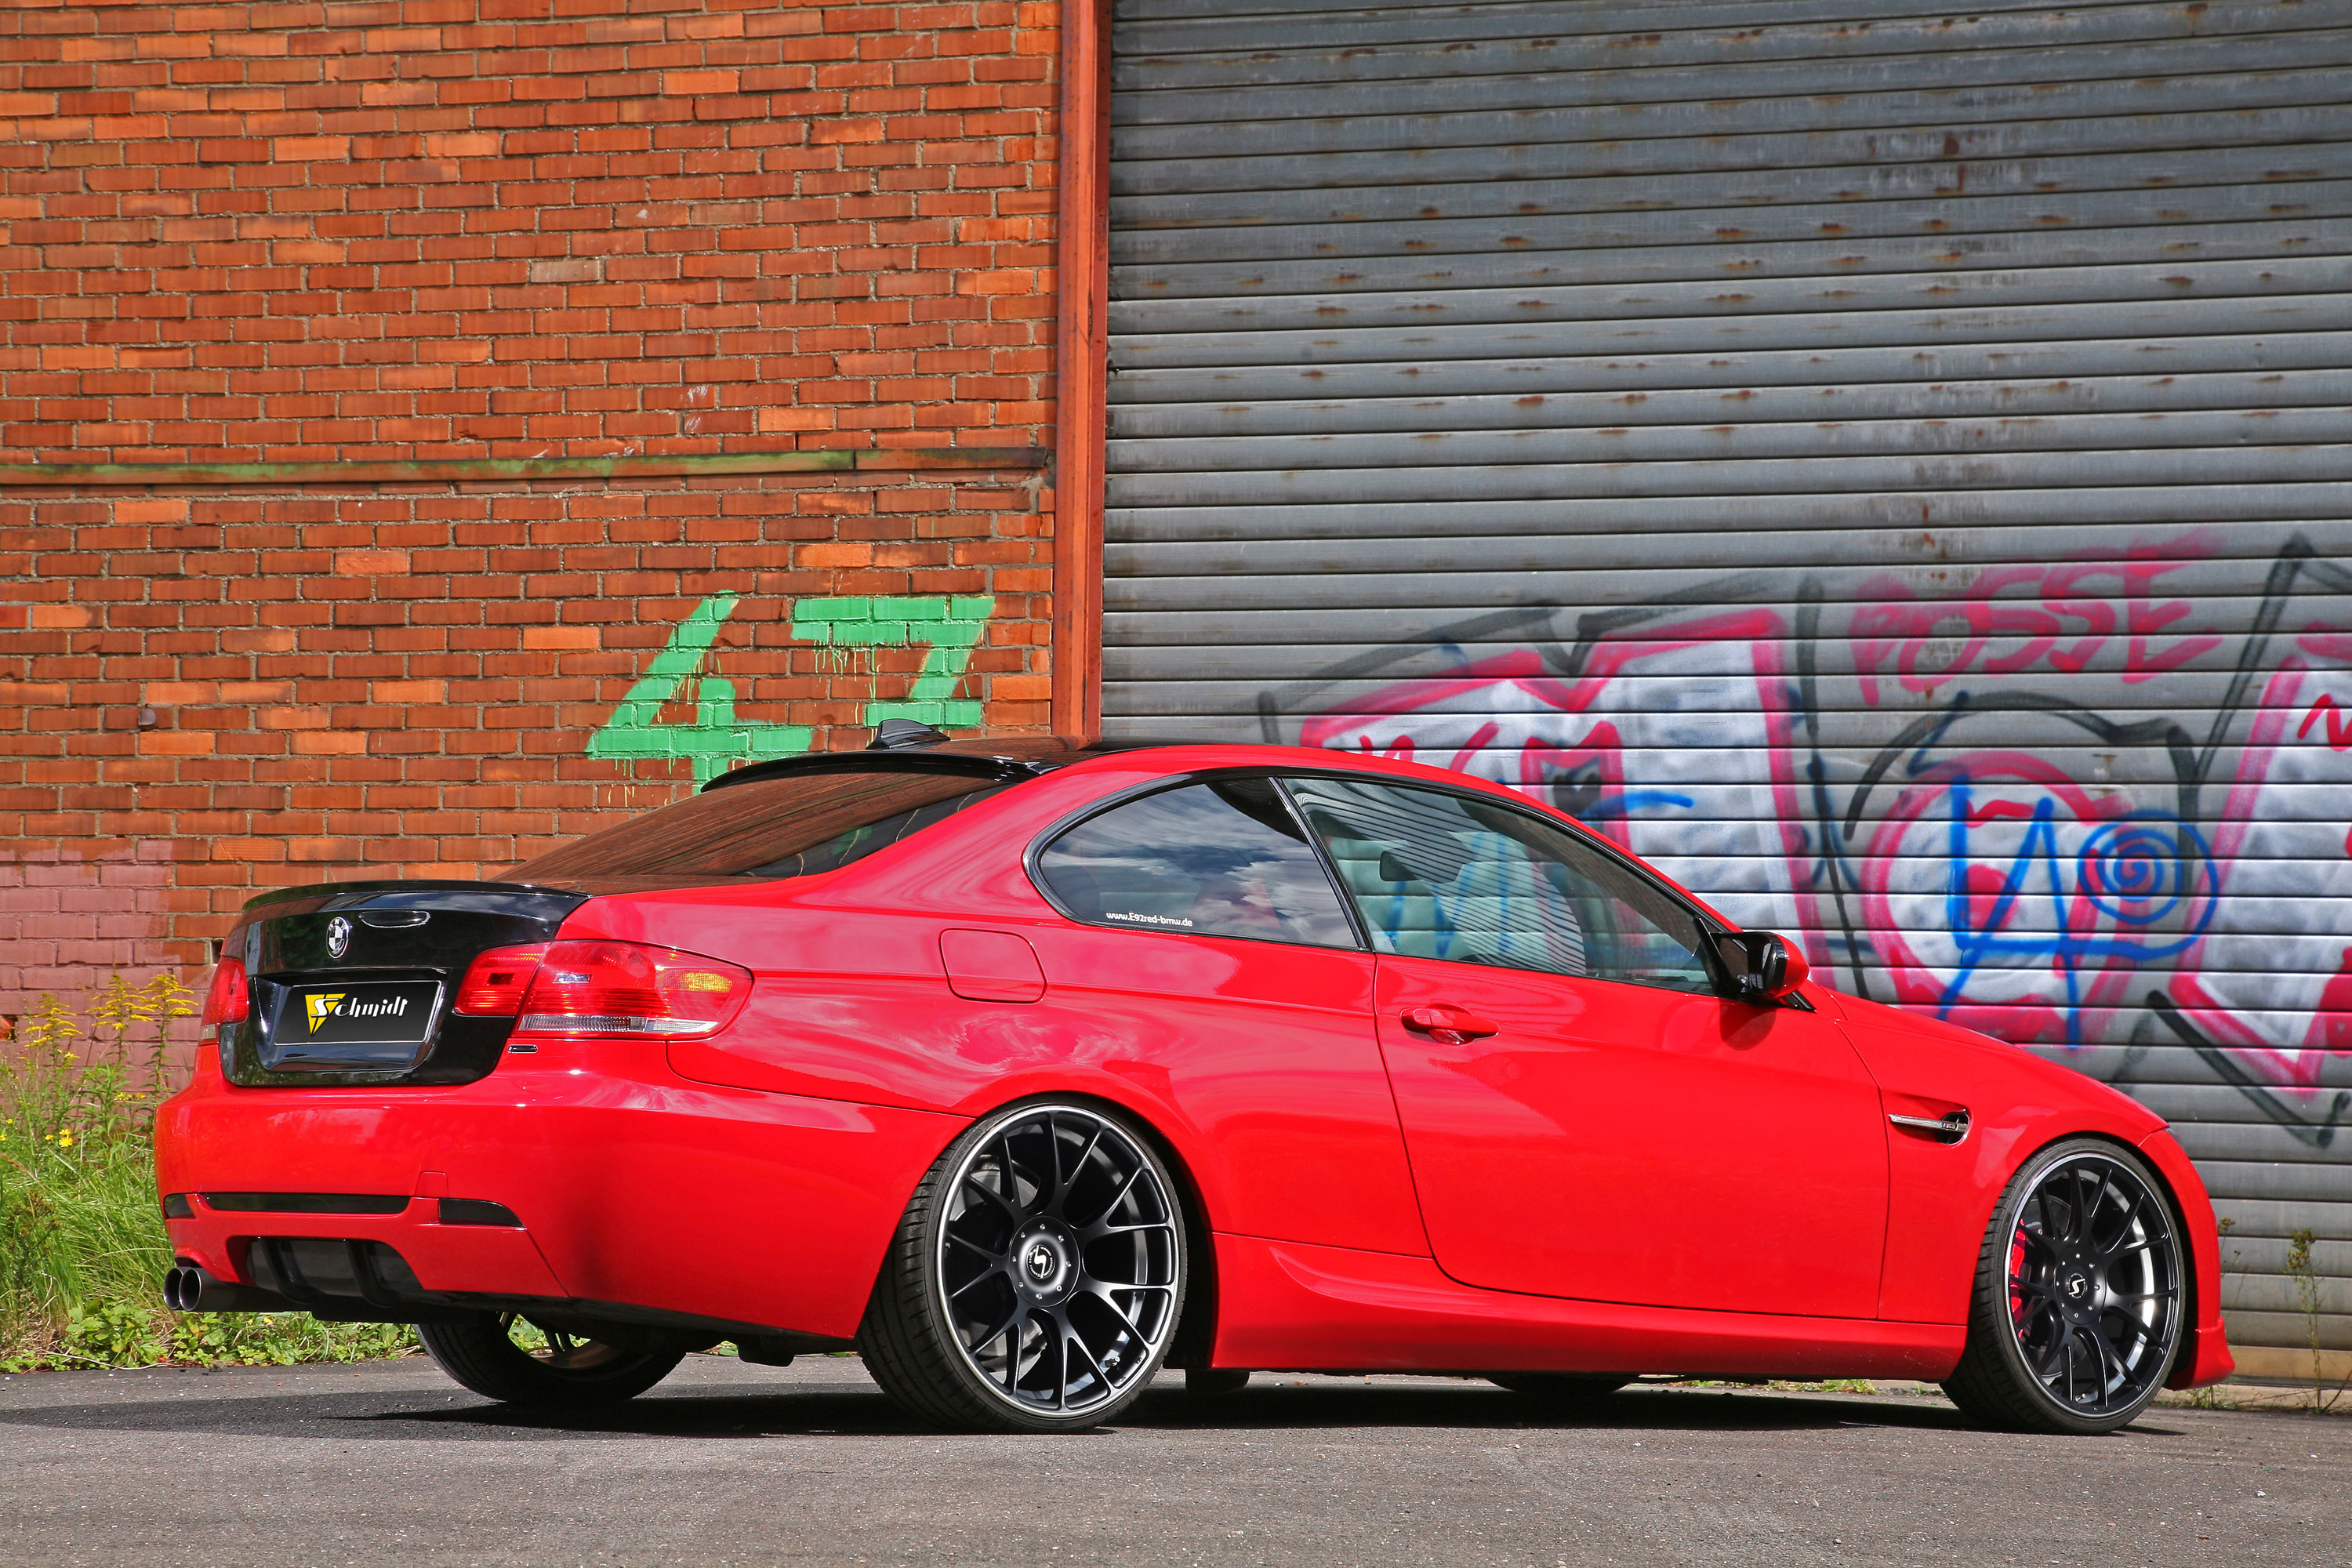 2012, Tuning concepts, Bmw, E92, Tuning Wallpaper